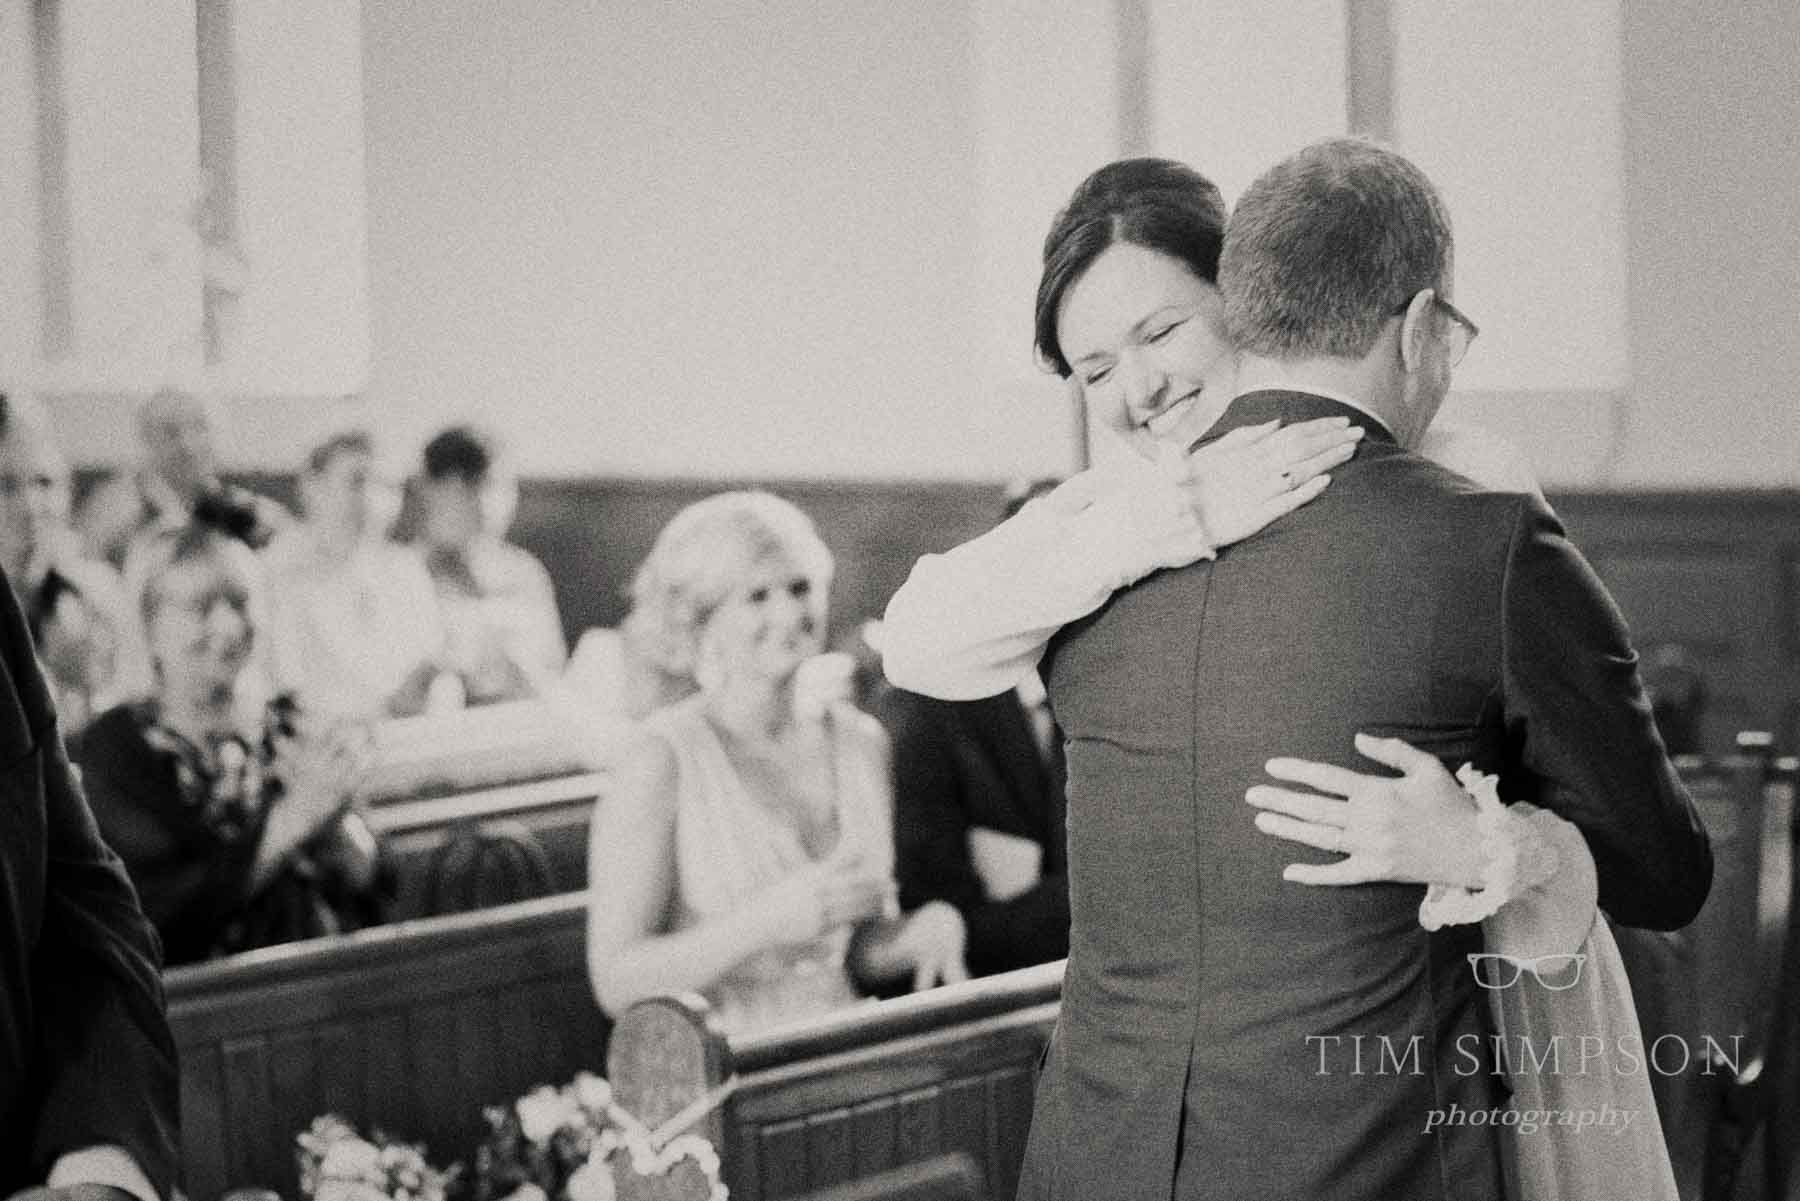 Inn at Whitewell wedding photography (9 of 24)